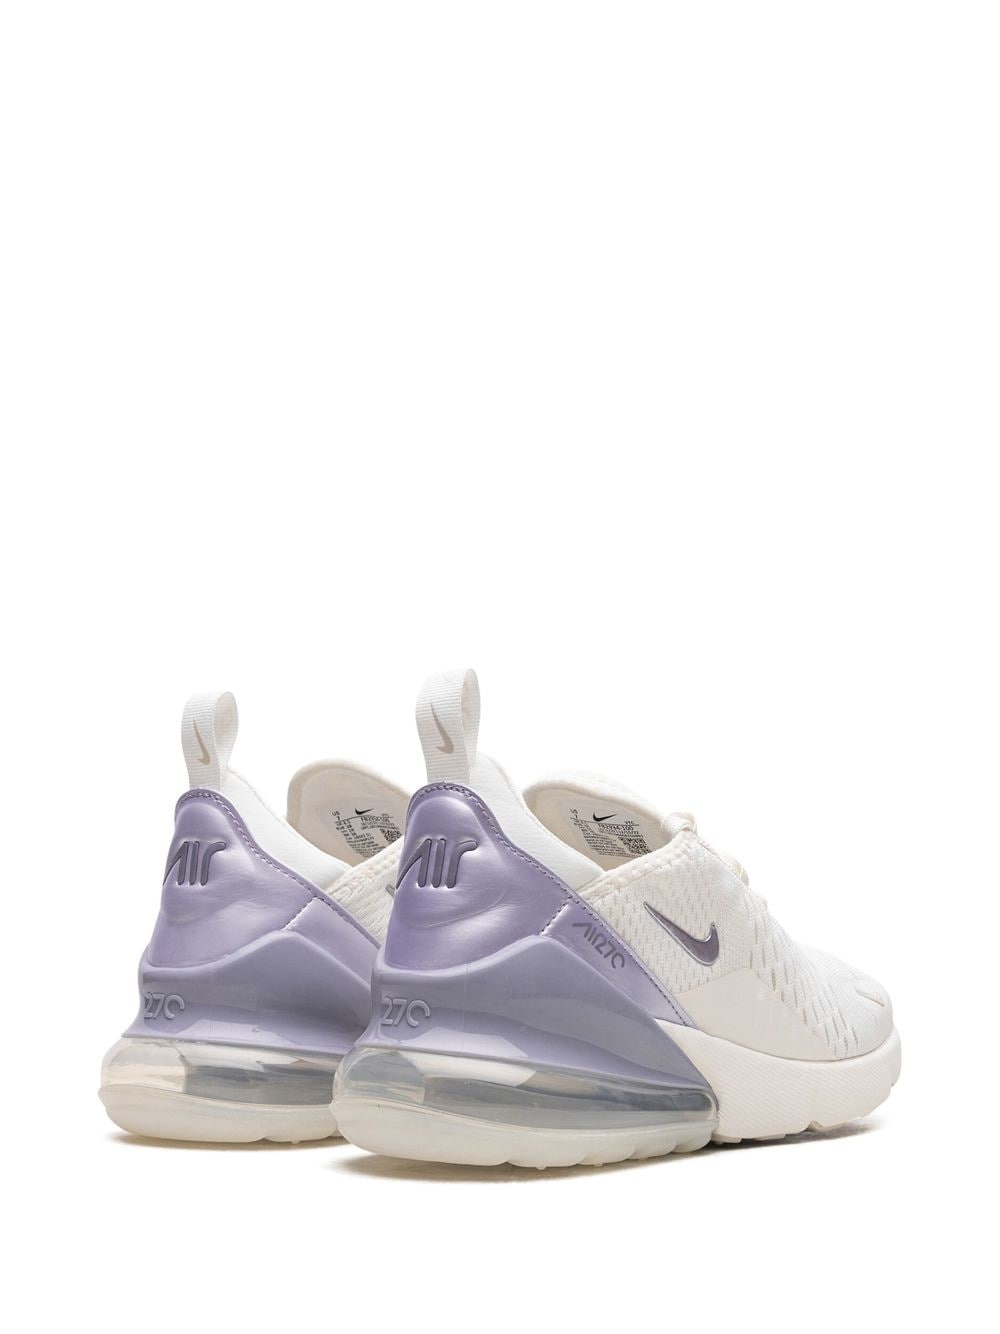 Air Max 270 "Oxygen Purple" sneakers - 3